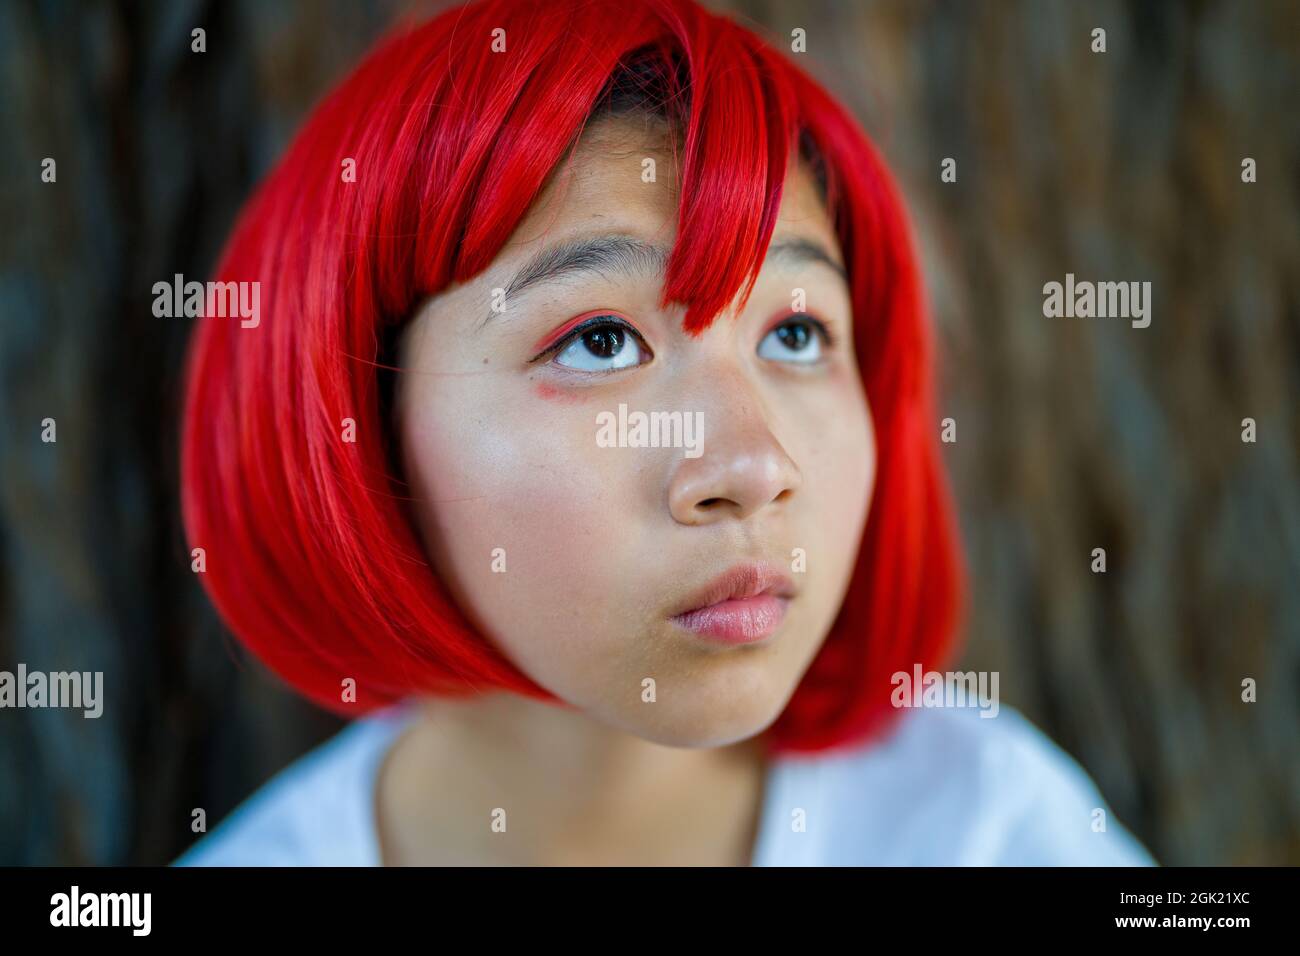 Red Blood Cell Cosplay Actress Standing with Redwood Tree | Teen Asian Girl with Red Wig Stock Photo